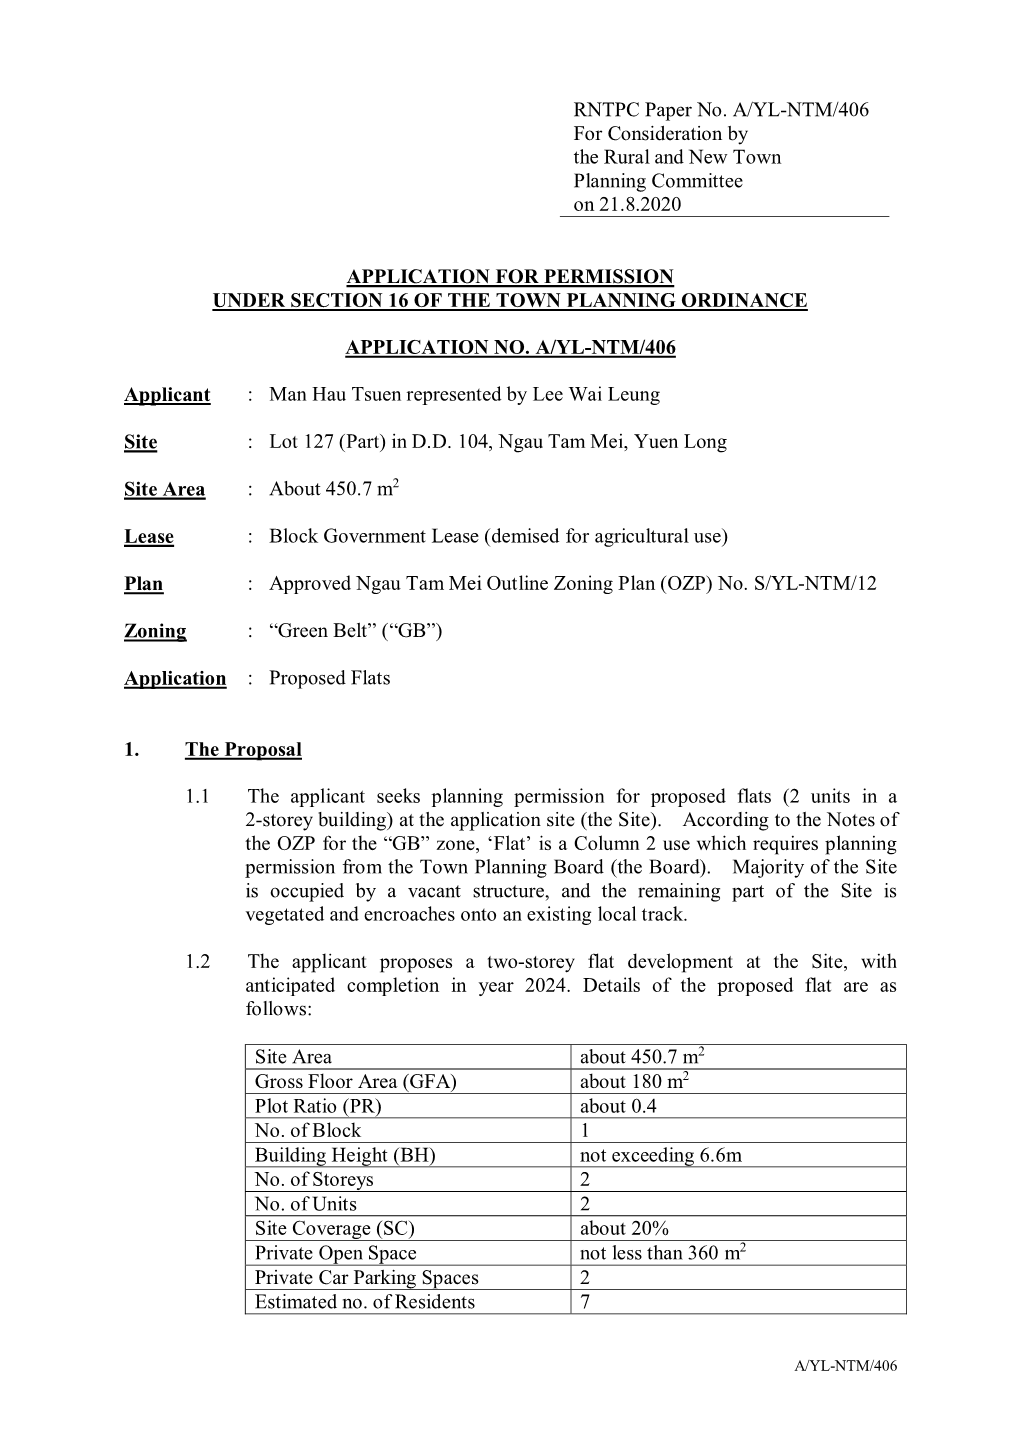 RNTPC Paper No. A/YL-NTM/406 for Consideration by the Rural and New Town Planning Committee on 21.8.2020